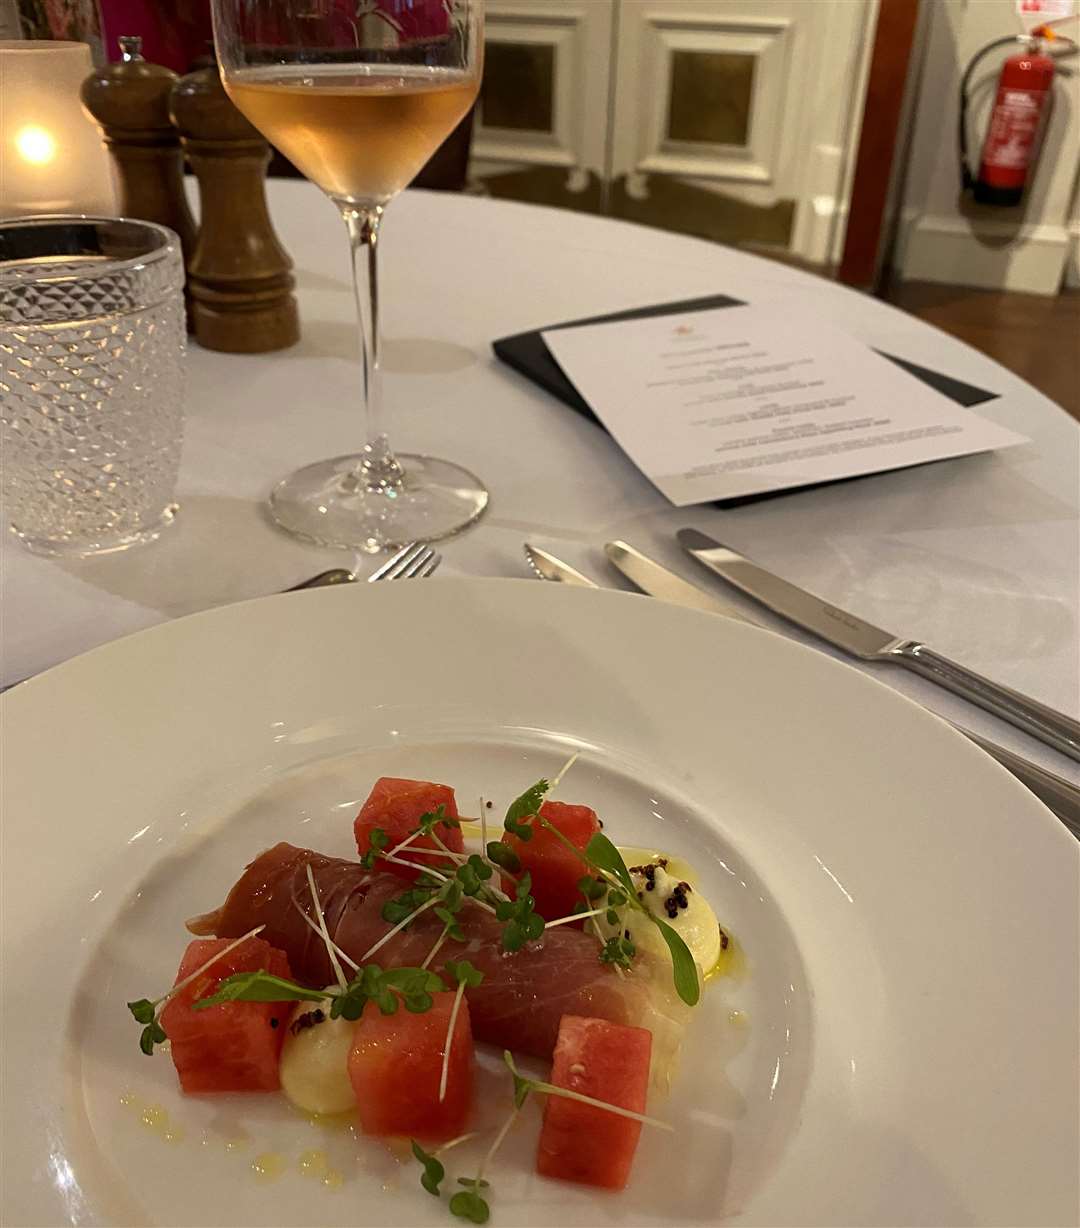 The feta, parma ham and watermelon salad with the Railway Hill Rose was a perfect summer starter